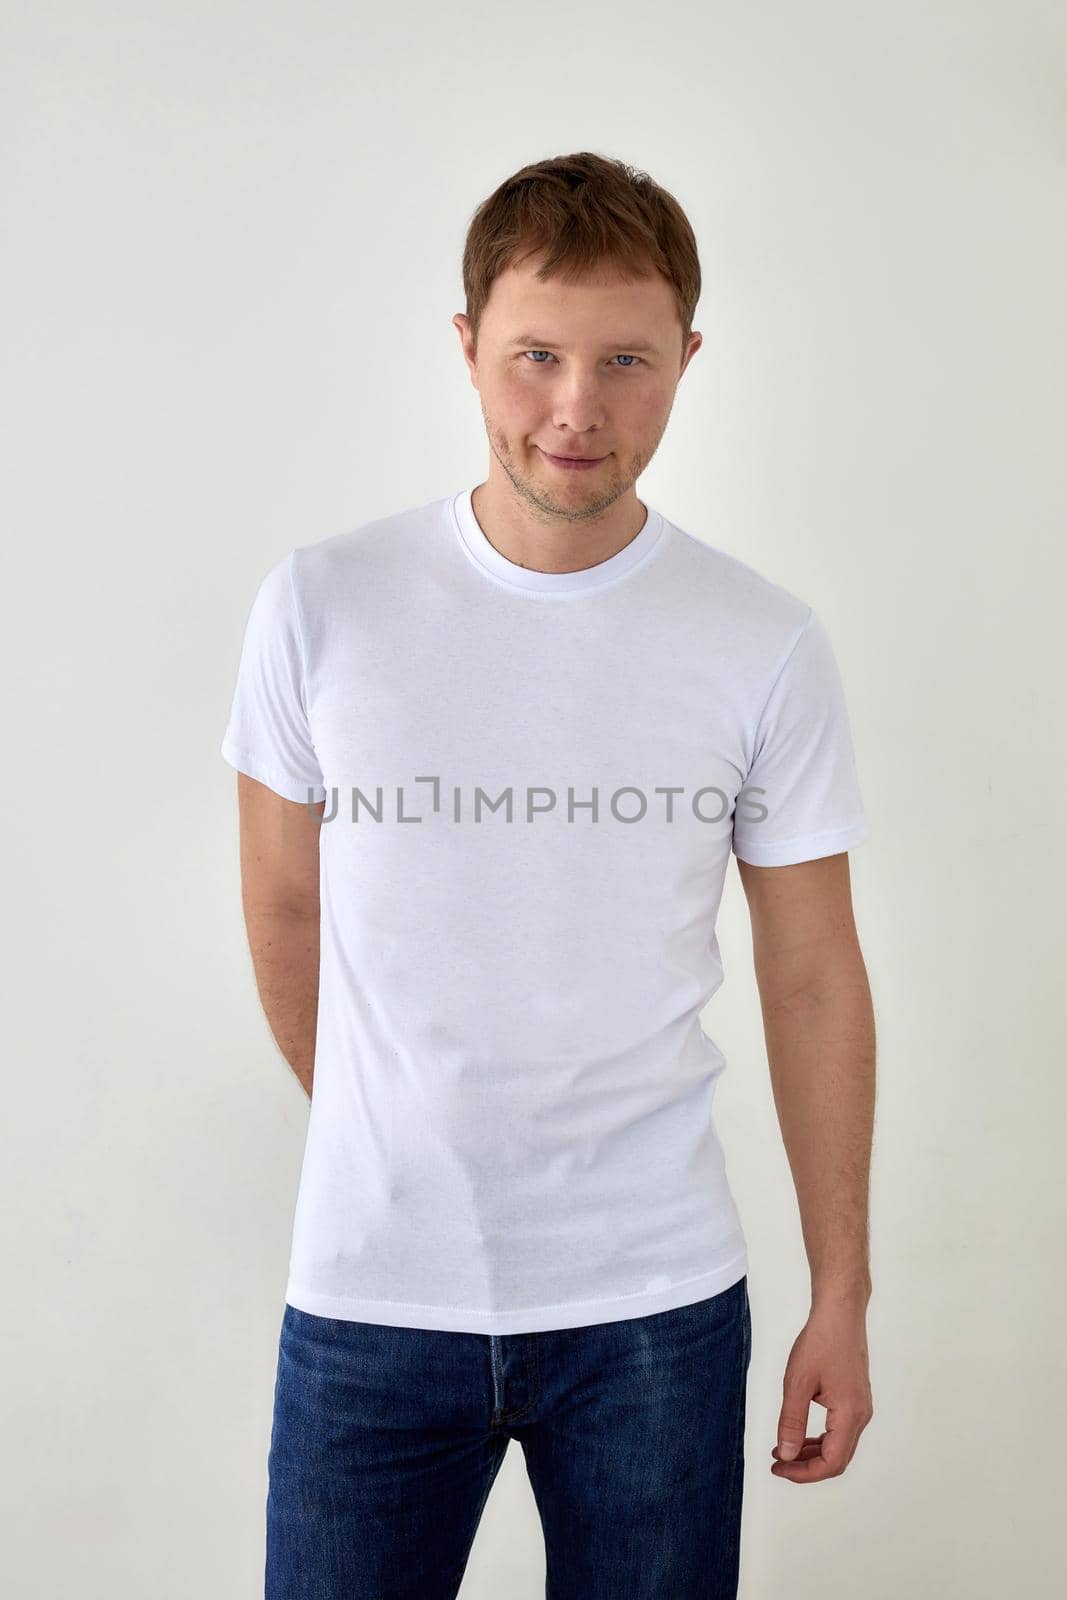 Positive young man in casual outfit standing on white background by Demkat